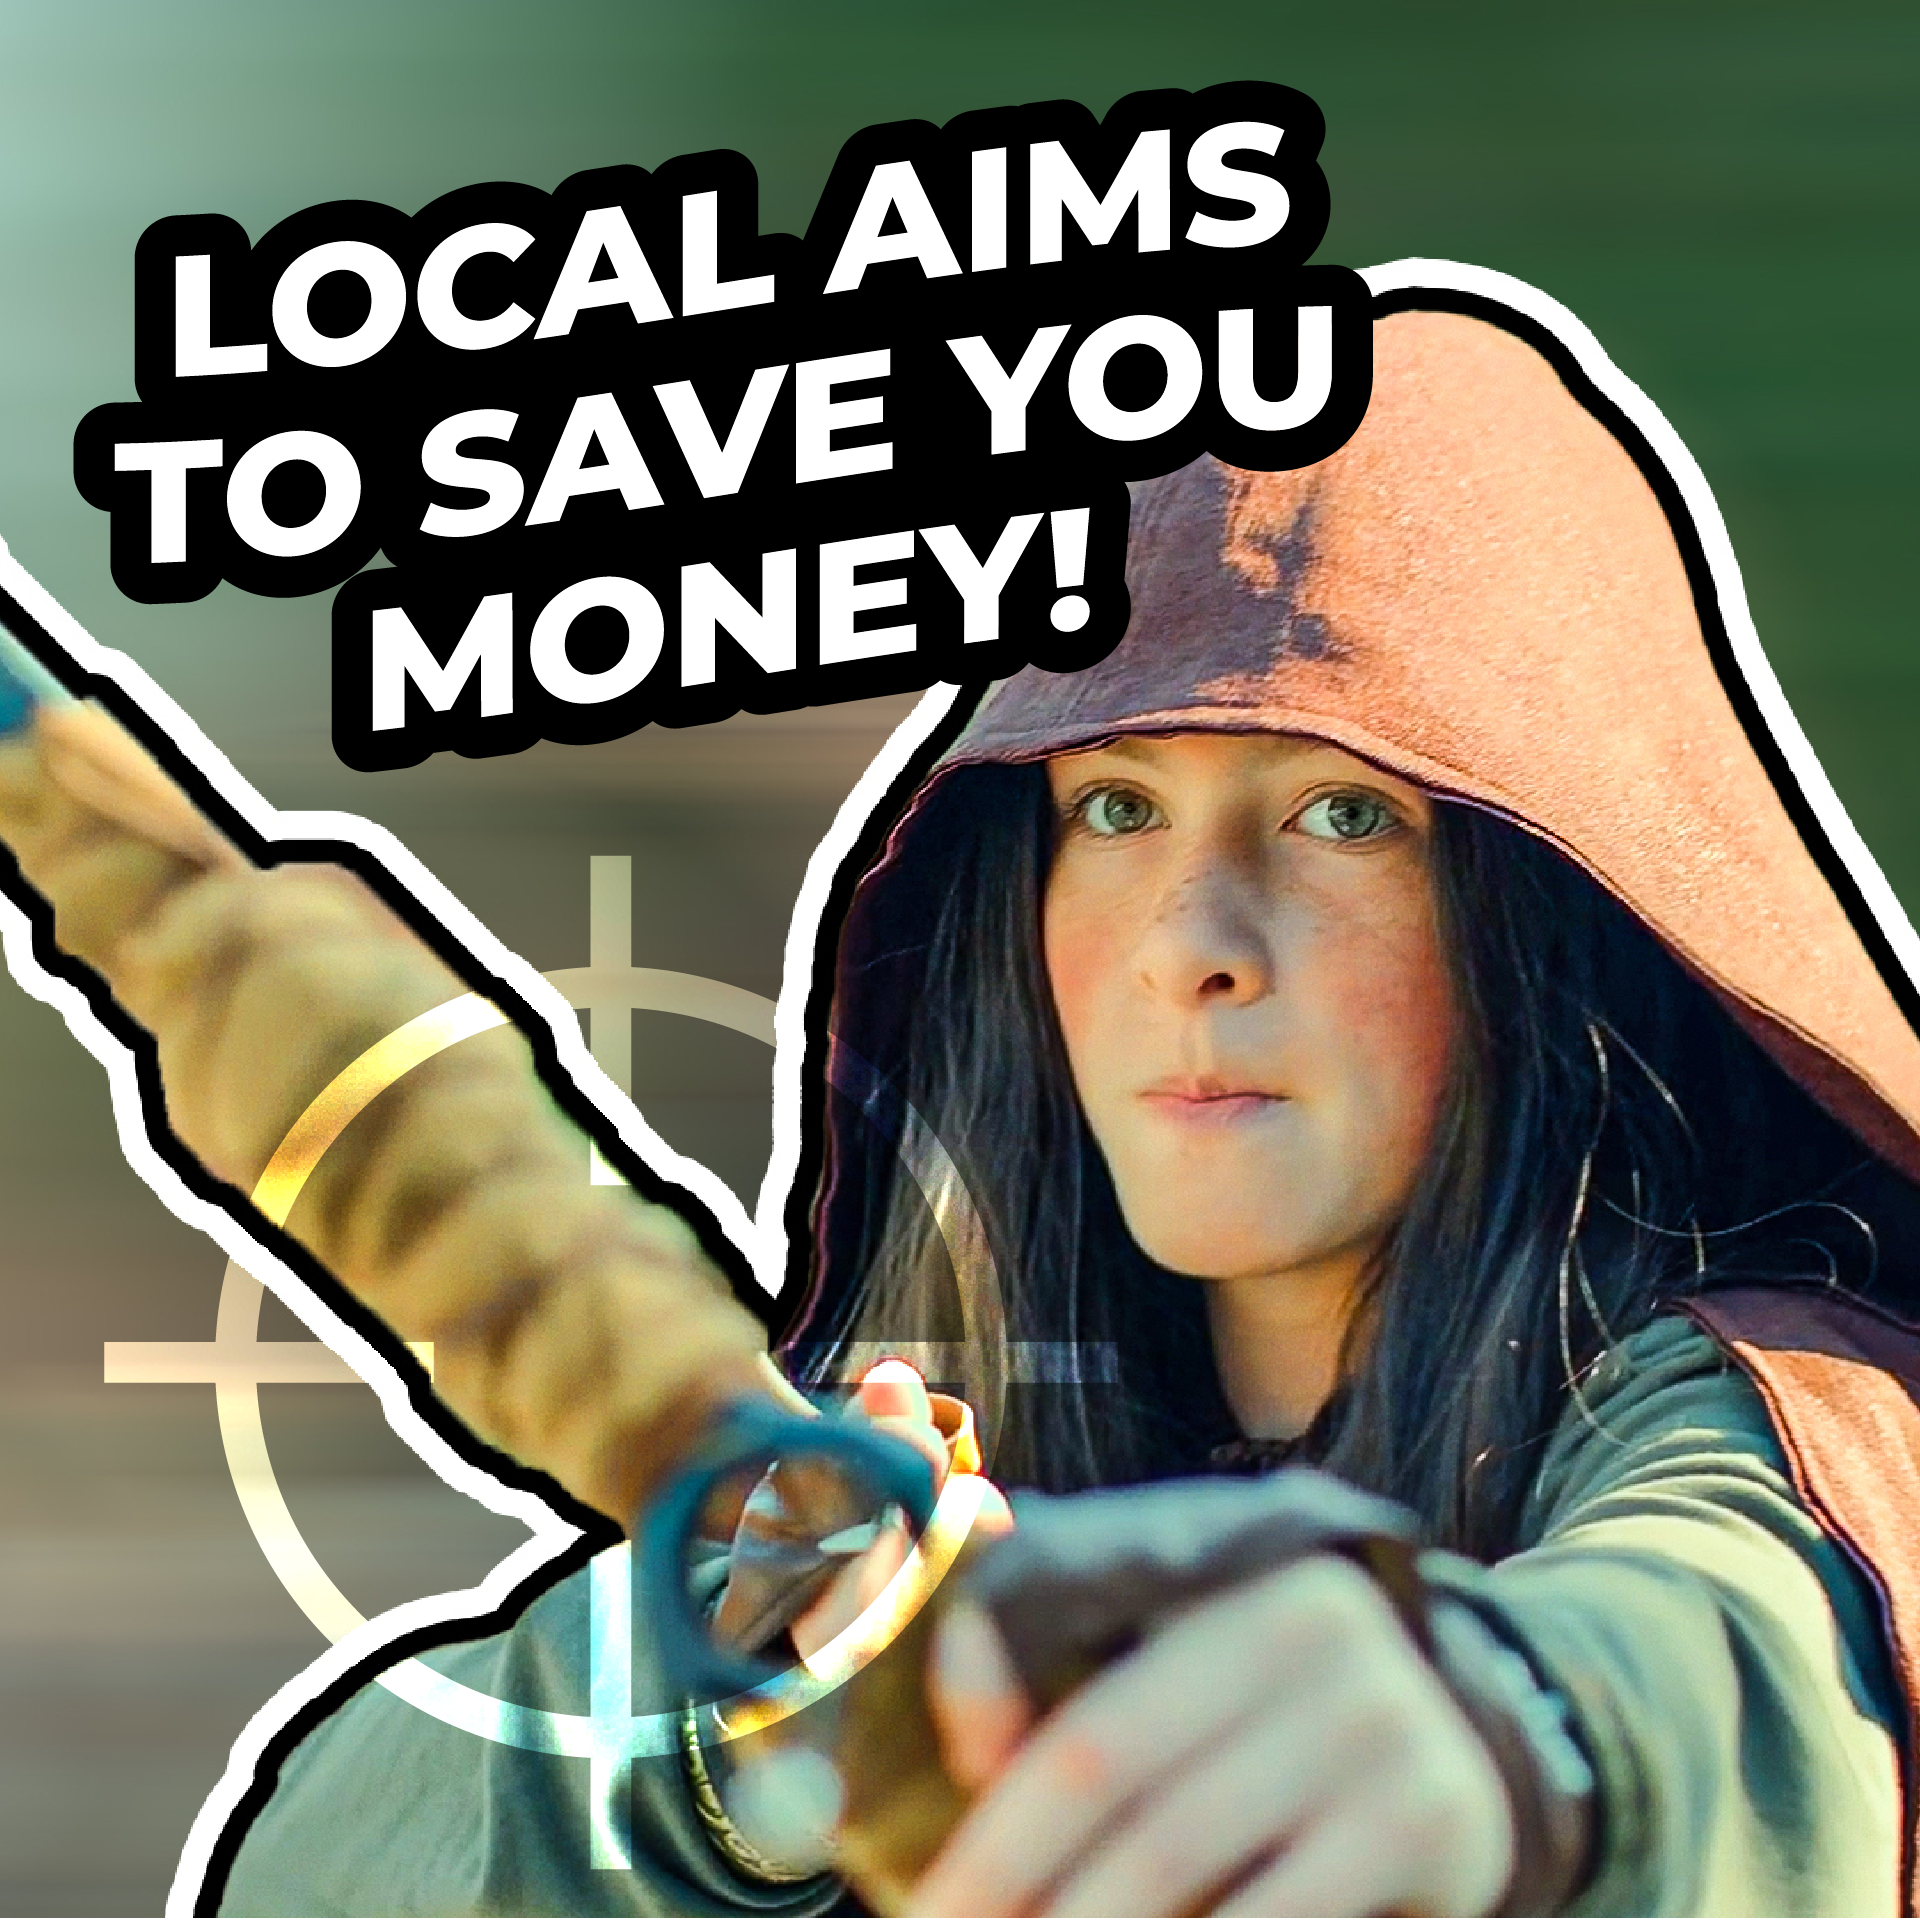 Local aims to save you money!